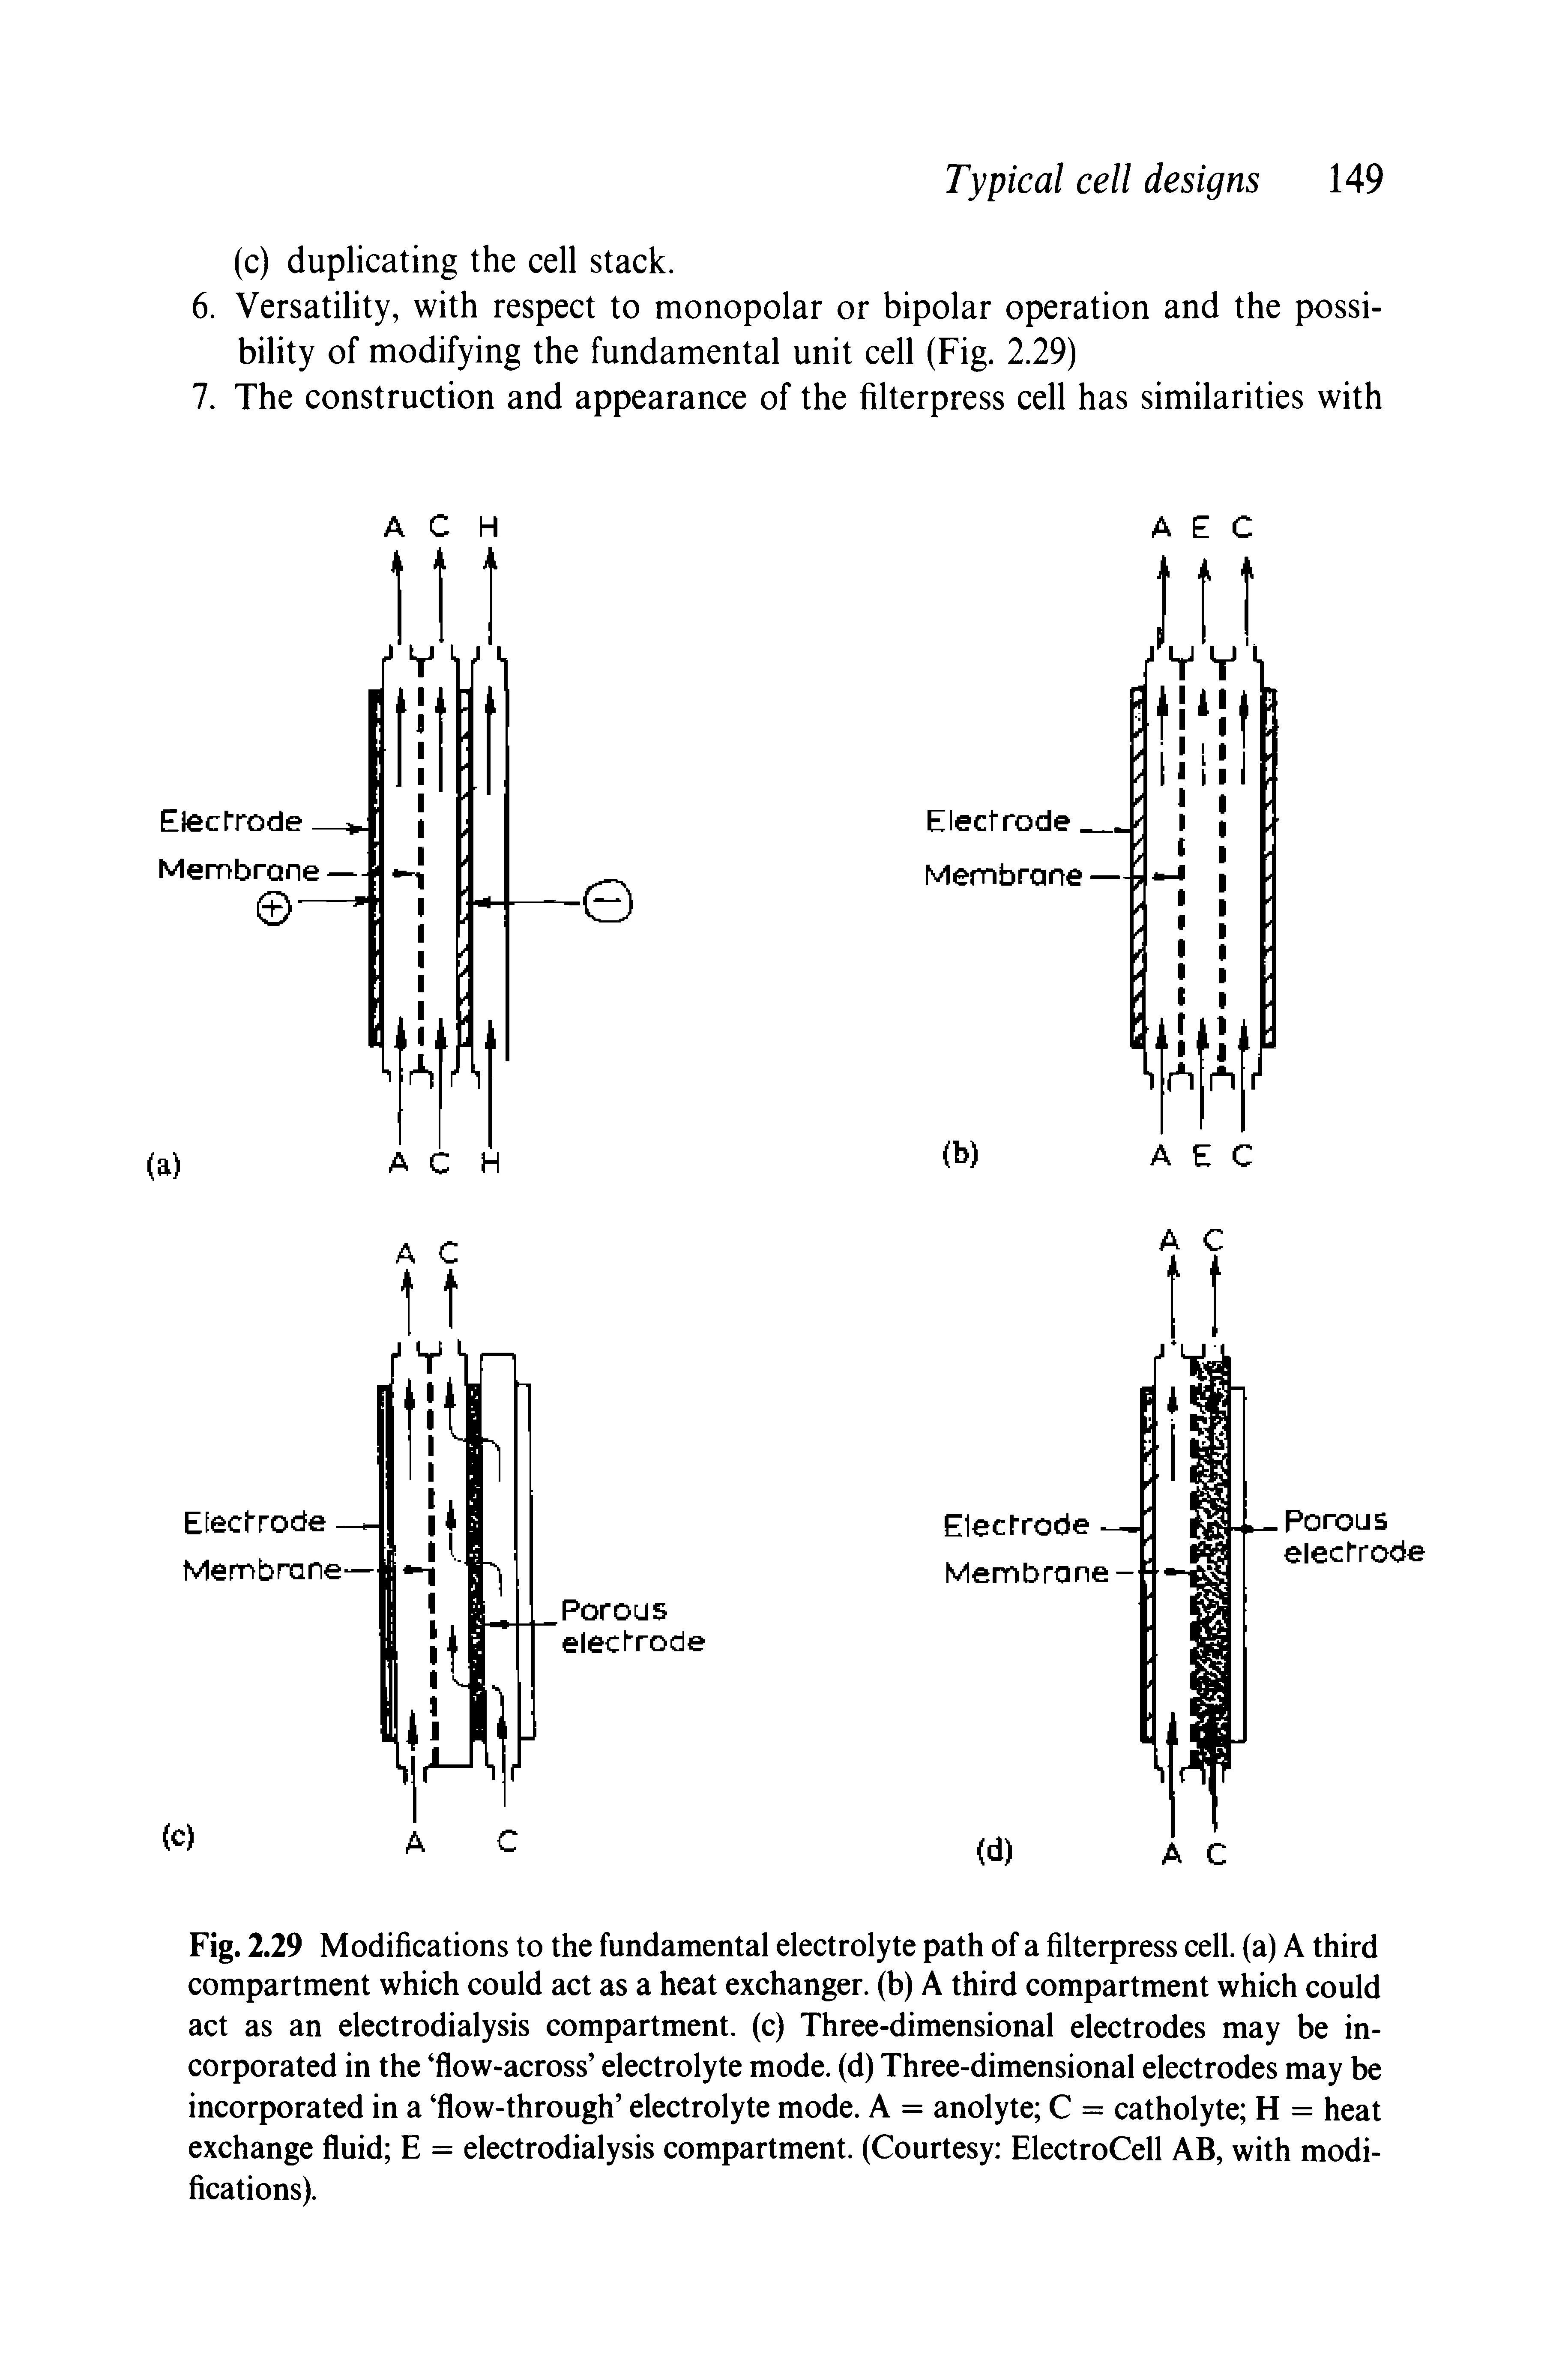 Fig. 2.29 Modifications to the fundamental electrolyte path of a filterpress cell, (a) A third compartment which could act as a heat exchanger, (b) A third compartment which could act as an electrodialysis compartment, (c) Three-dimensional electrodes may be incorporated in the flow-across electrolyte mode, (d) Three-dimensional electrodes may be incorporated in a flow-through electrolyte mode. A = anolyte C = catholyte H = heat exchange fluid E = electrodialysis compartment. (Courtesy ElectroCell AB, with modifications).